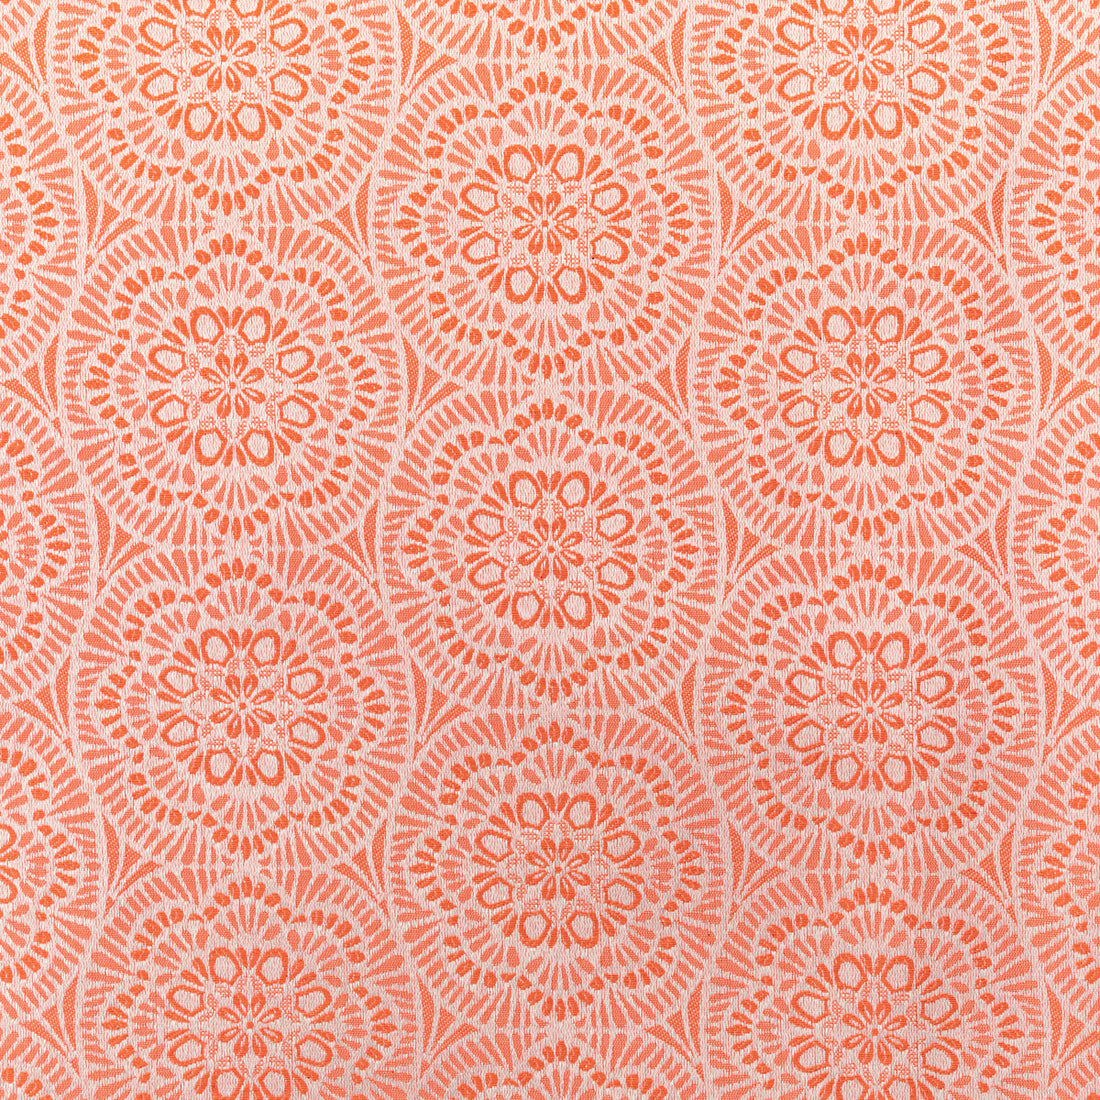 Tessa fabric in coral color - pattern 31544.12.0 - by Kravet Contract in the Gis Crypton collection